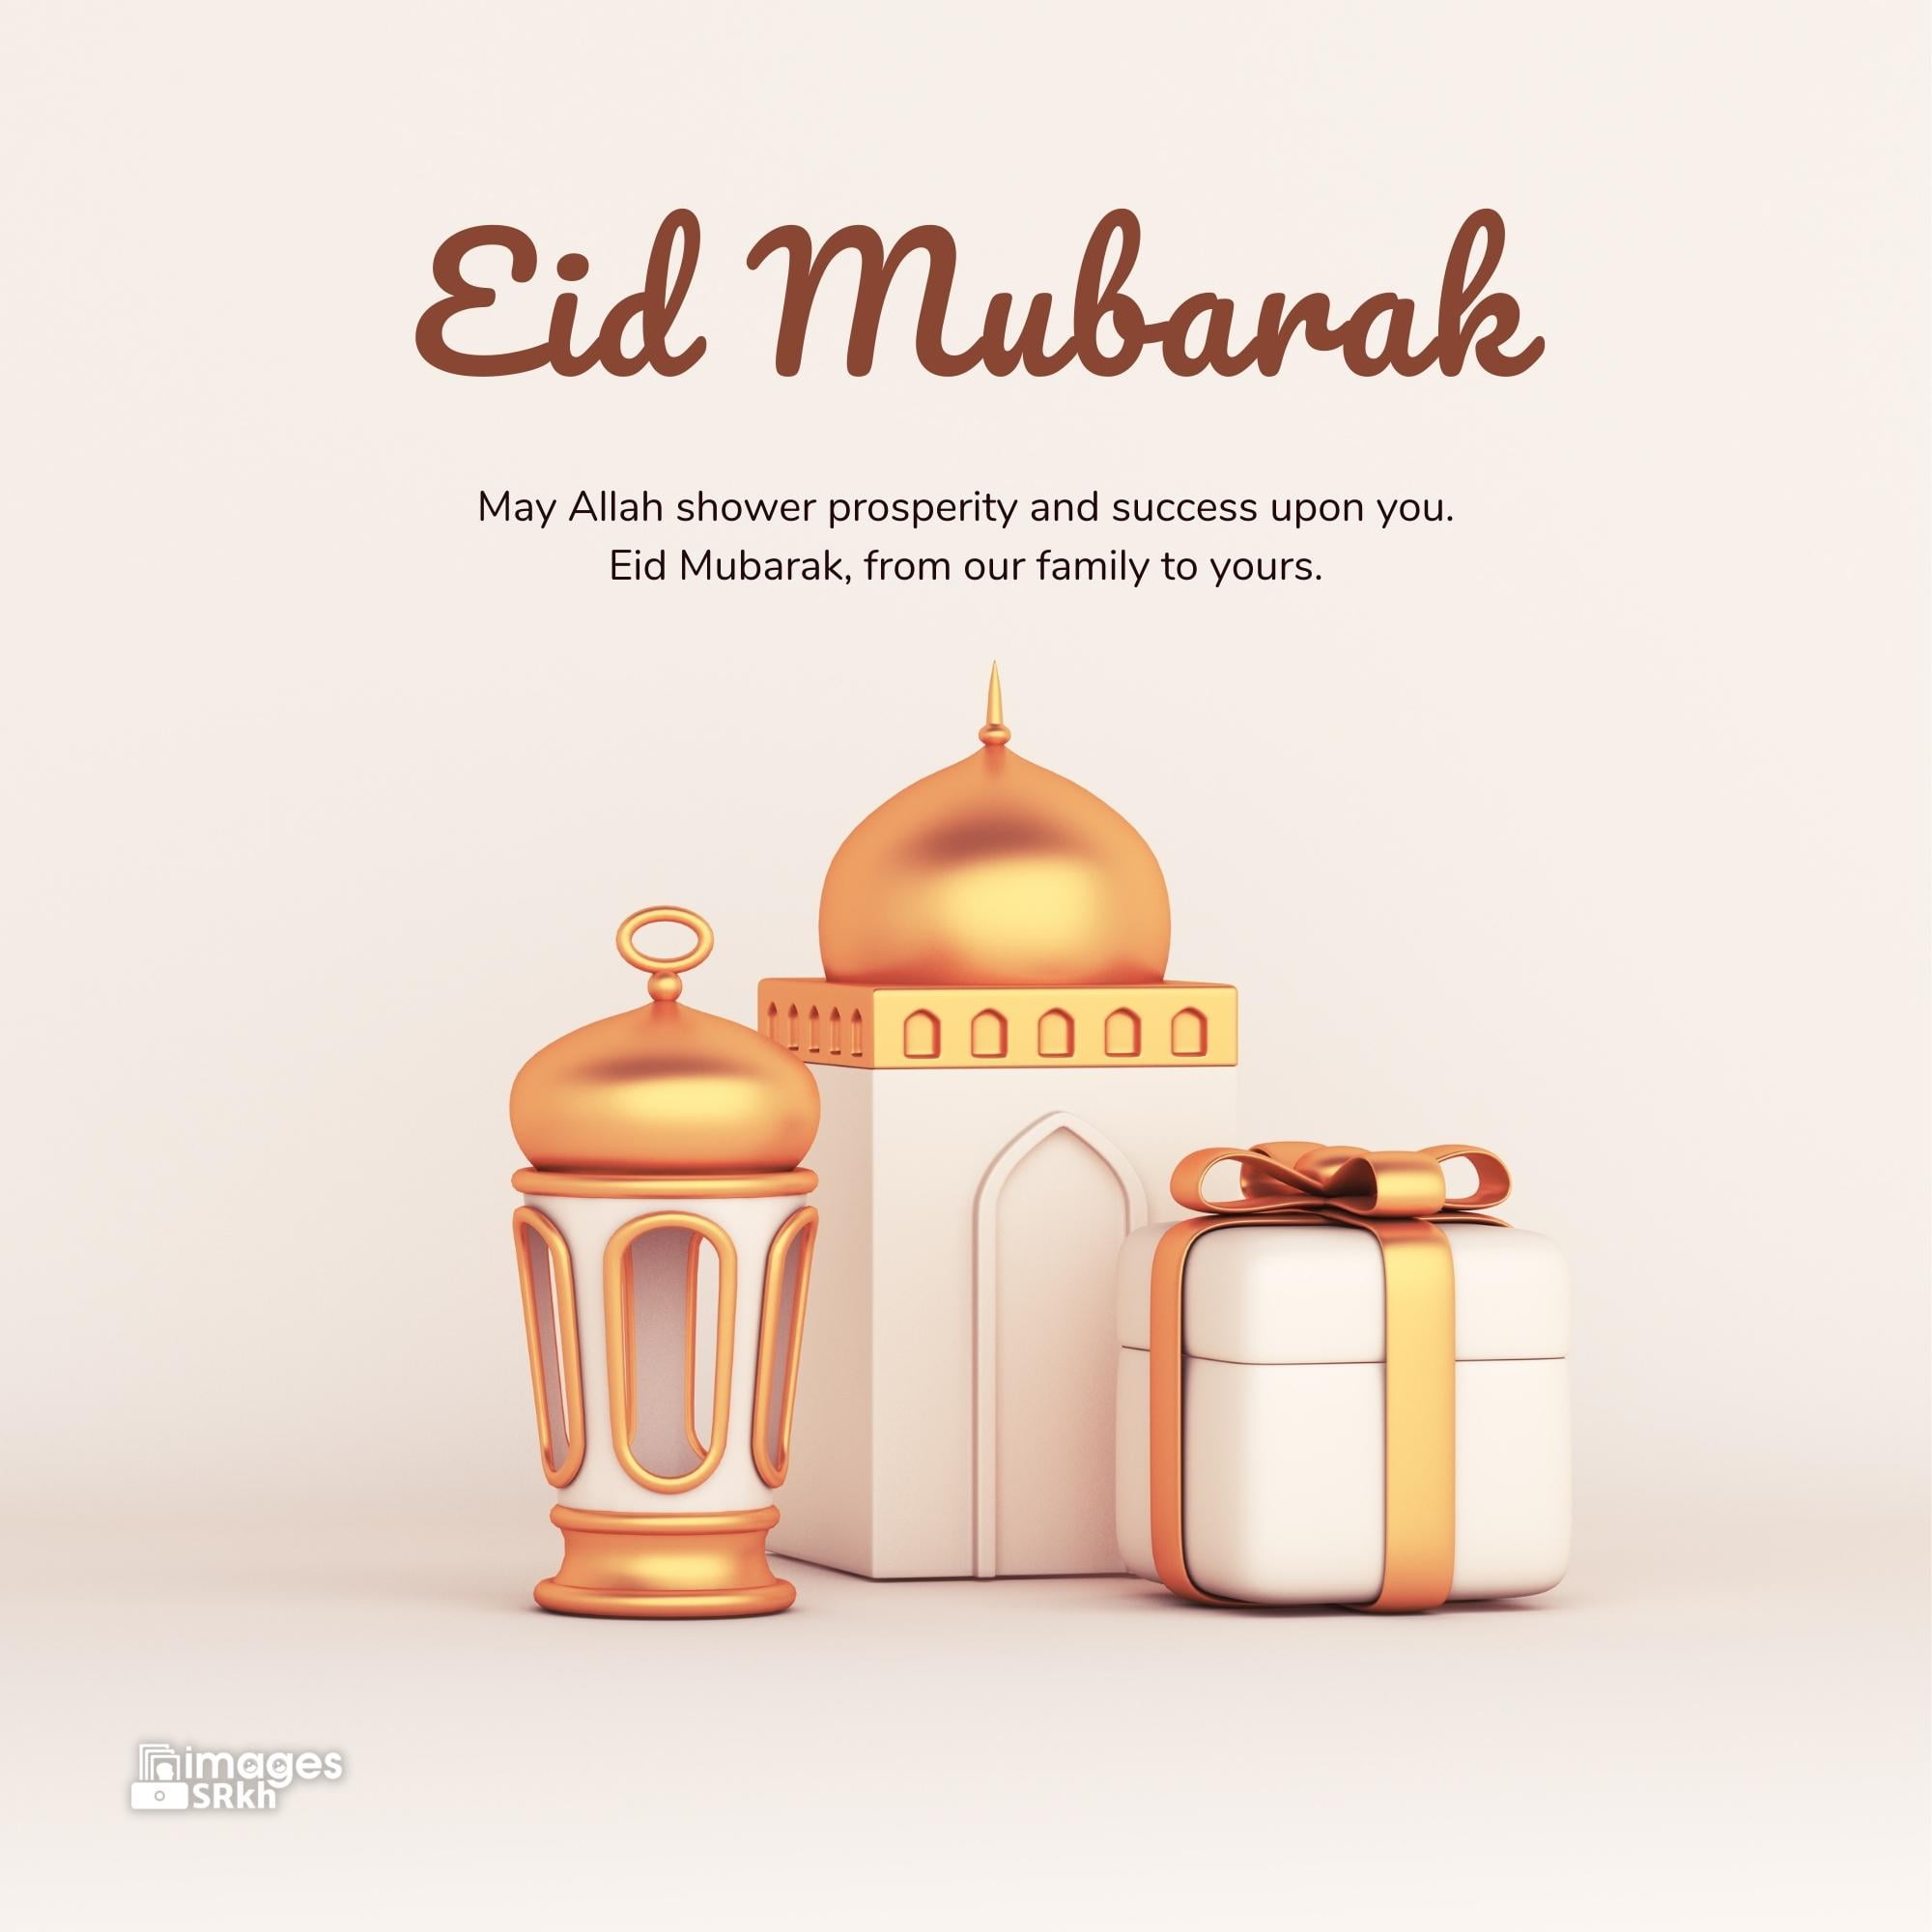 Wishes To Eid Mubarak (2) | Download free in Hd Quality | imagesSRkh